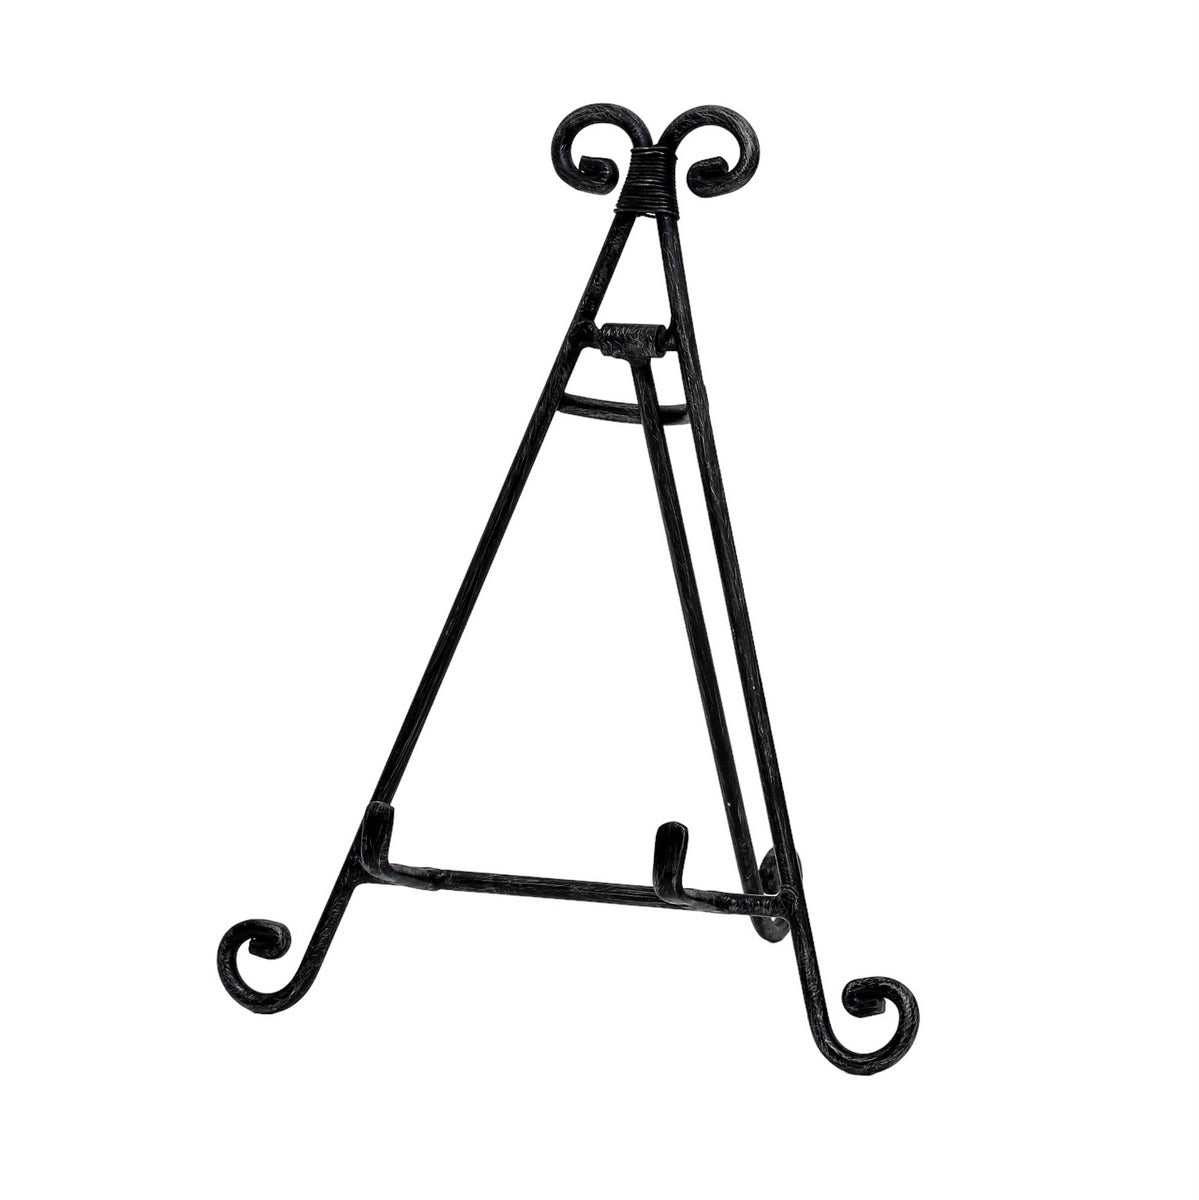 METAL STAND: Wrought Iron Plate Stand BLACK (Max plate size 14